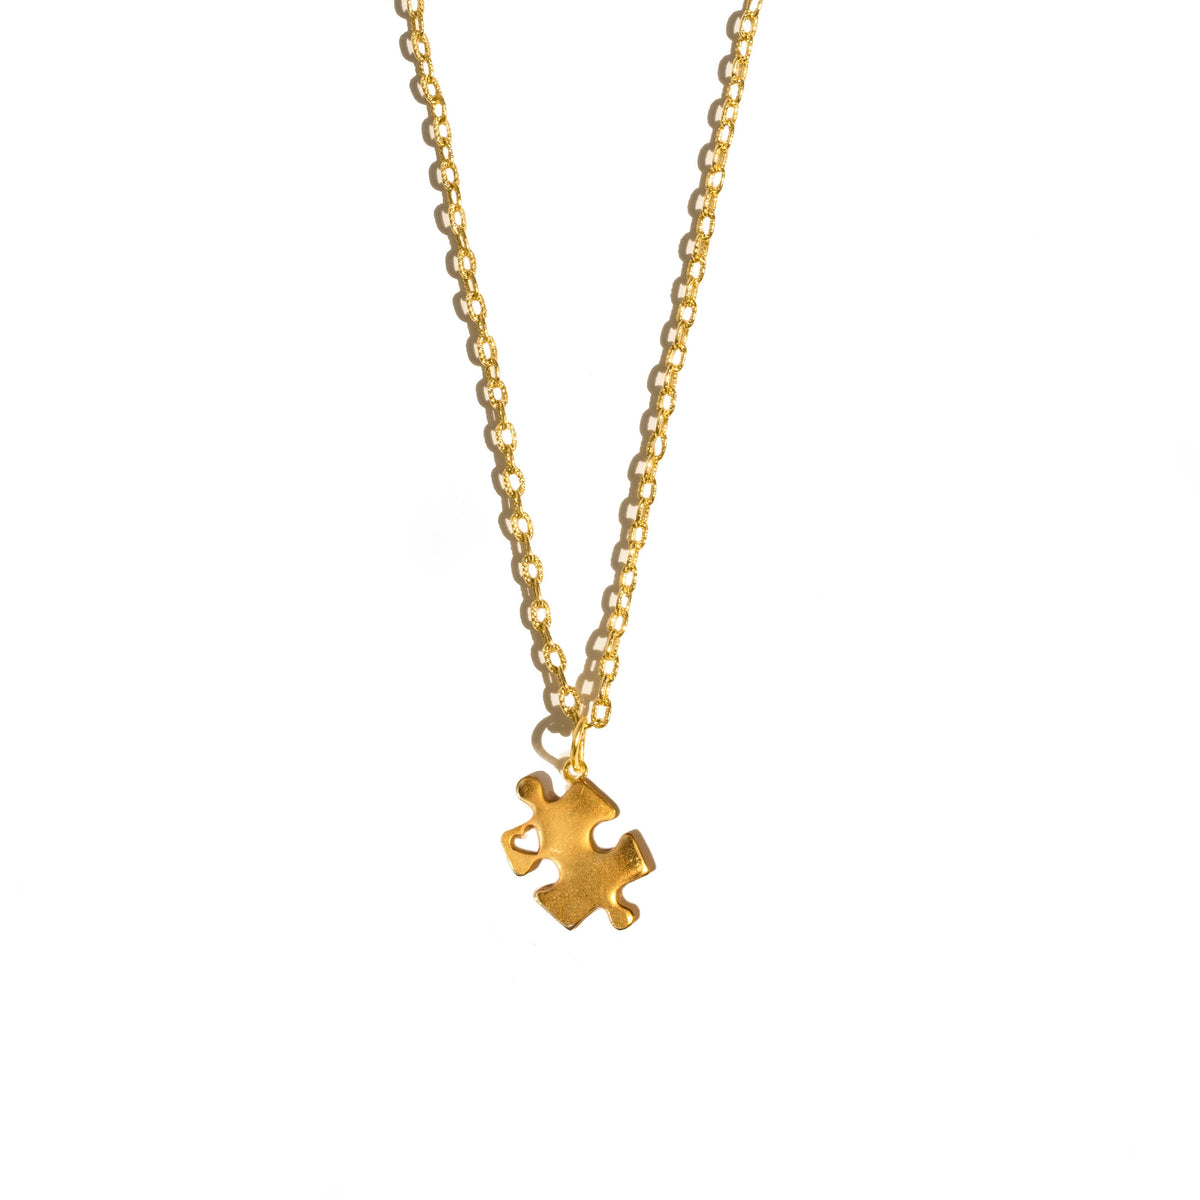 Gold necklace with a jigsaw puzzle piece charm